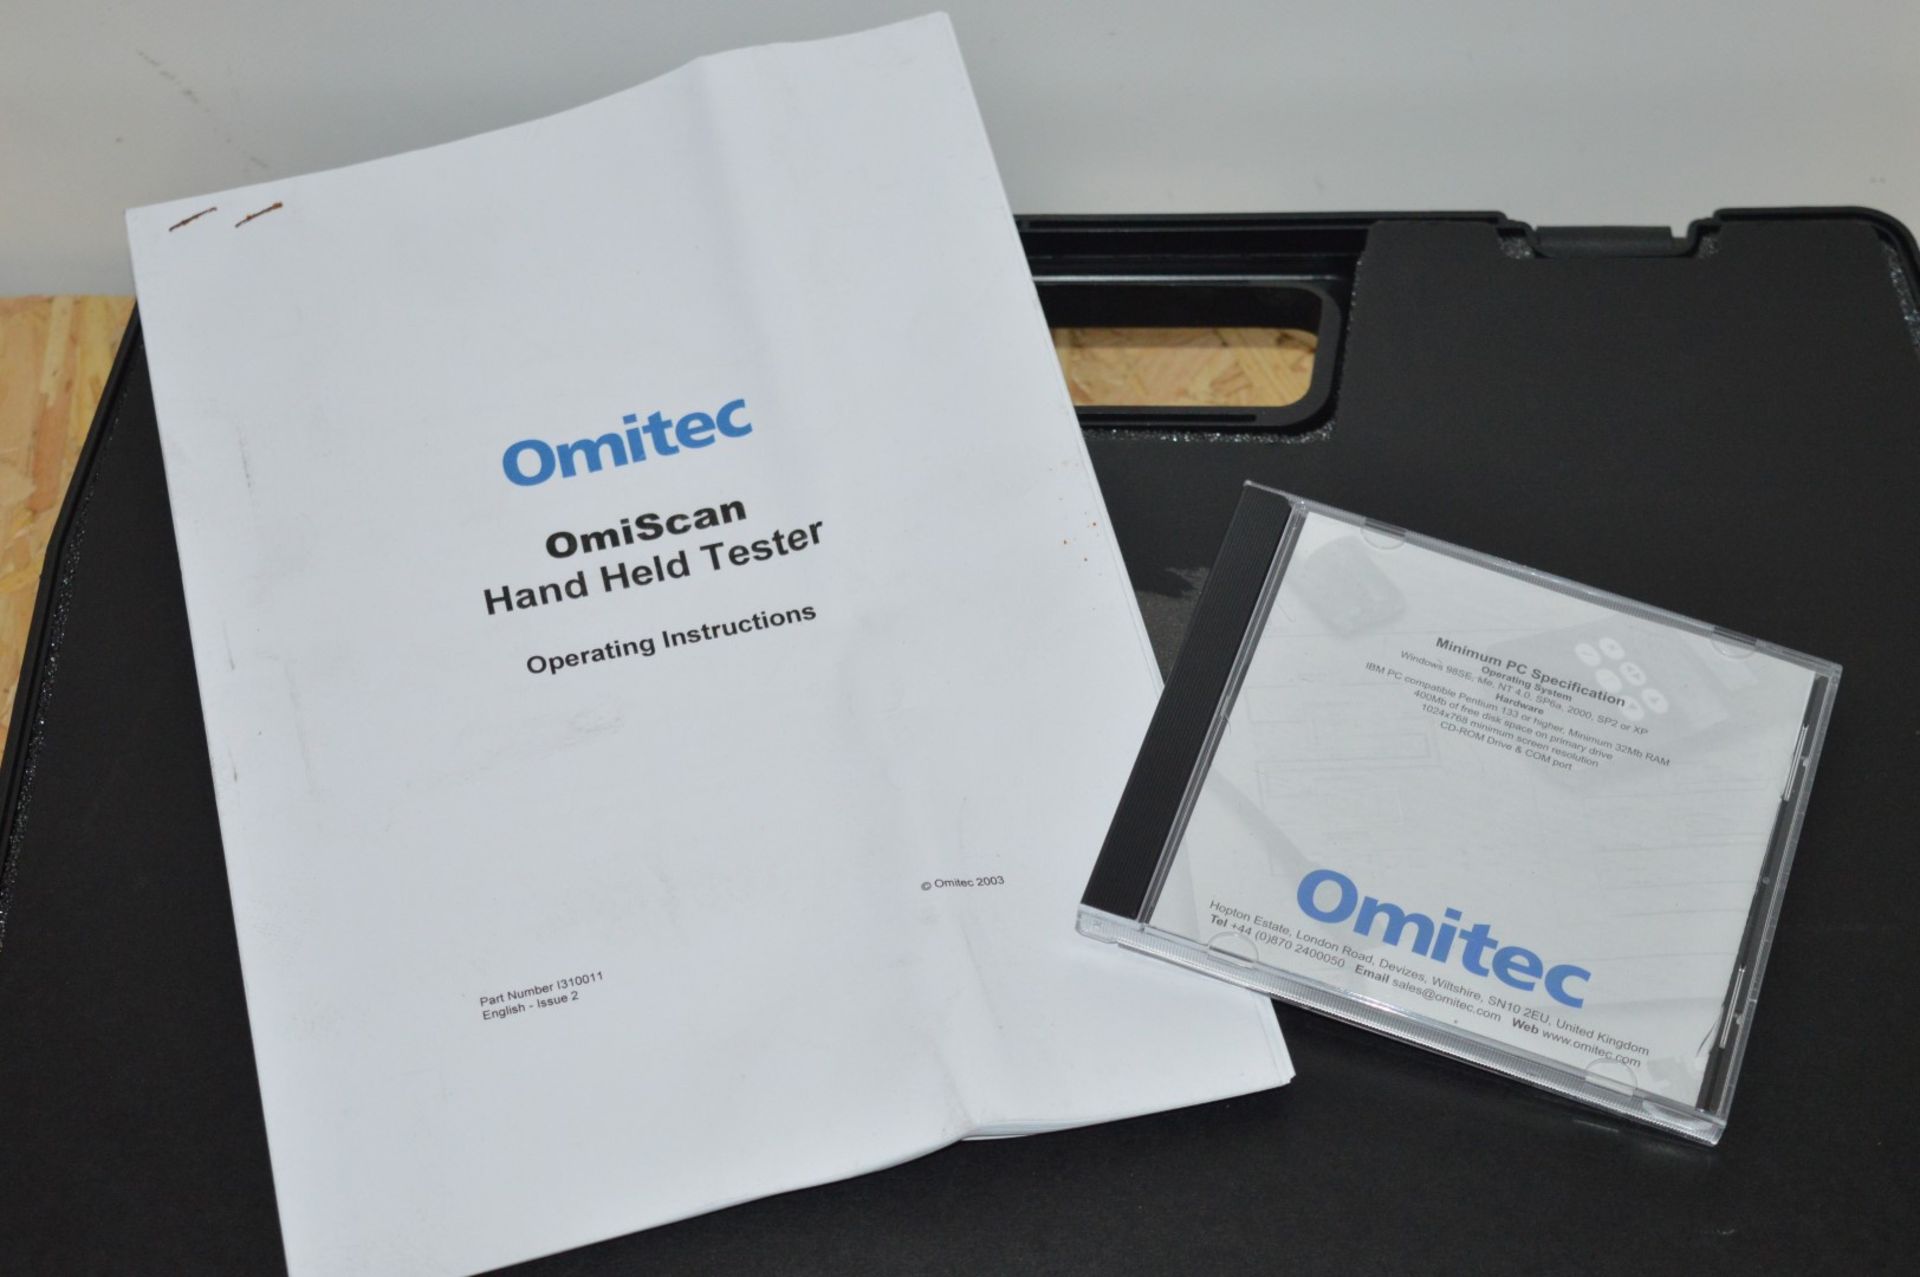 1 x Omitec OmiScan Automotive Diagnostic Tool - Model OM100/1 - Includes Carry Case, User Manual, - Image 6 of 7